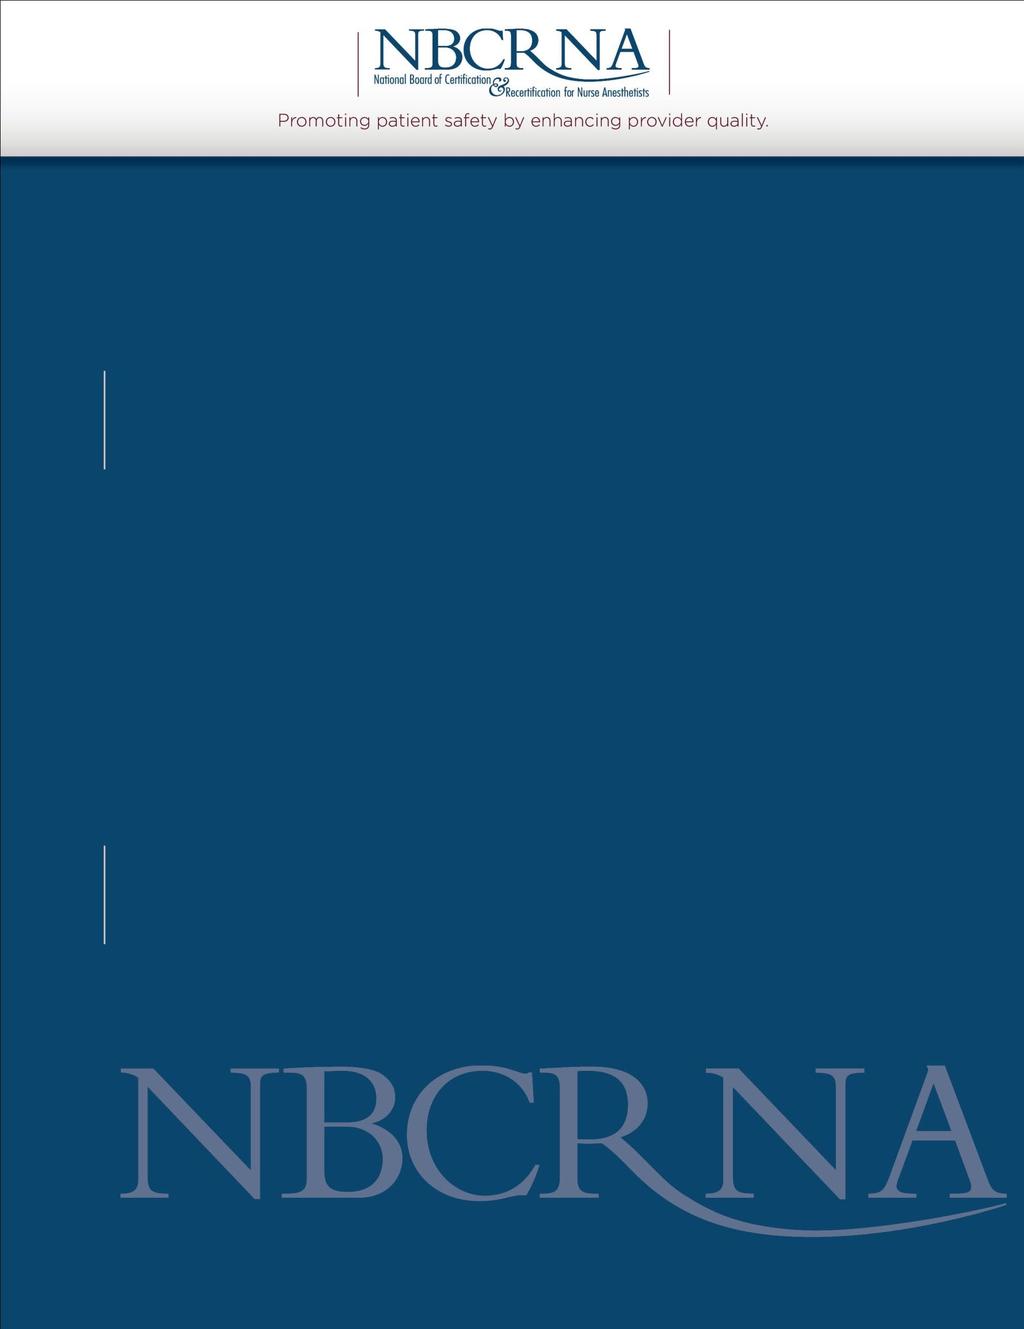 NBCRNA Annual Summary of NCE & SEE Performance